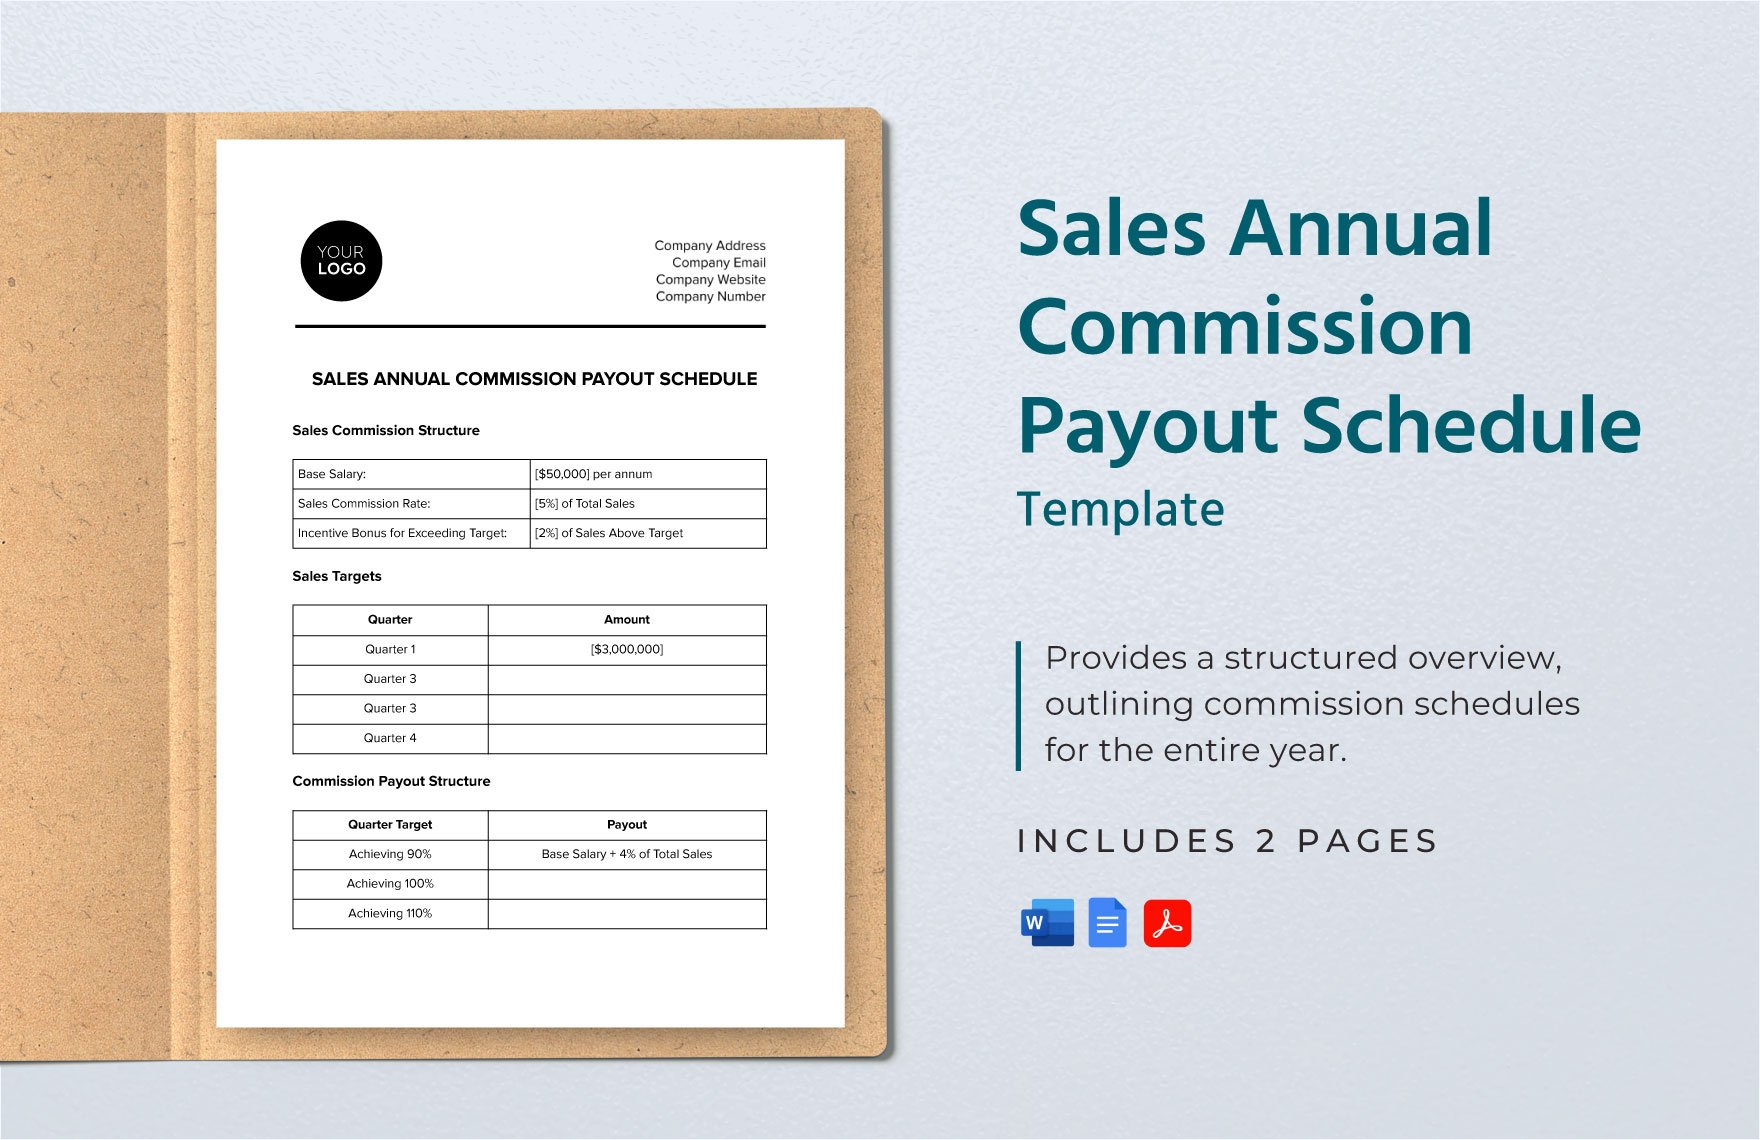 Sales Annual Commission Payout Schedule Template